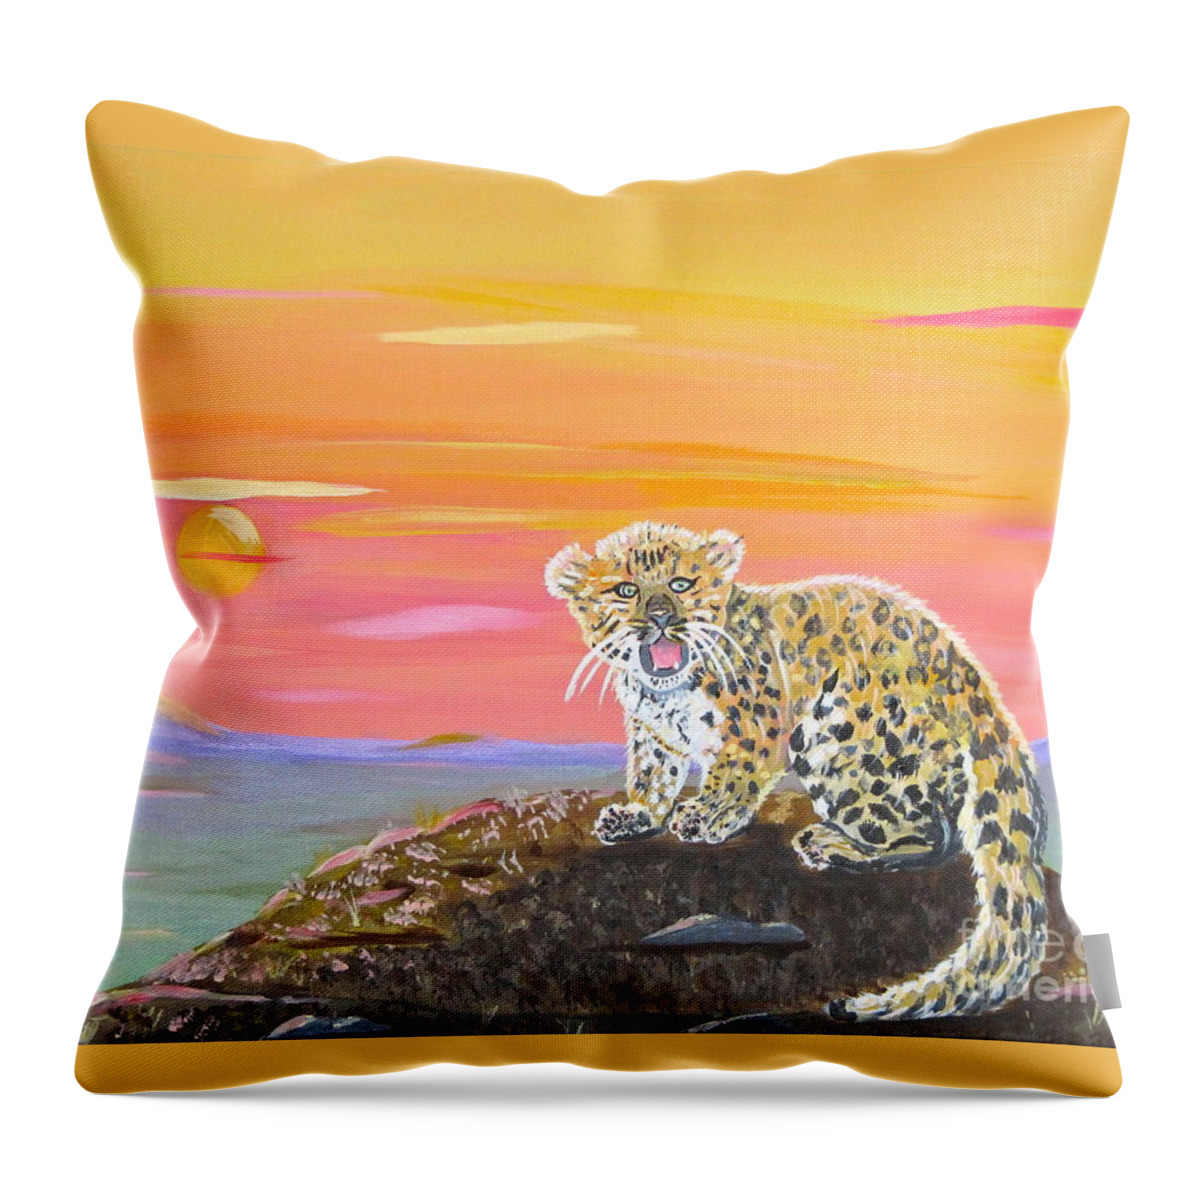 Sunset Throw Pillow featuring the painting Little Leopard by Phyllis Kaltenbach